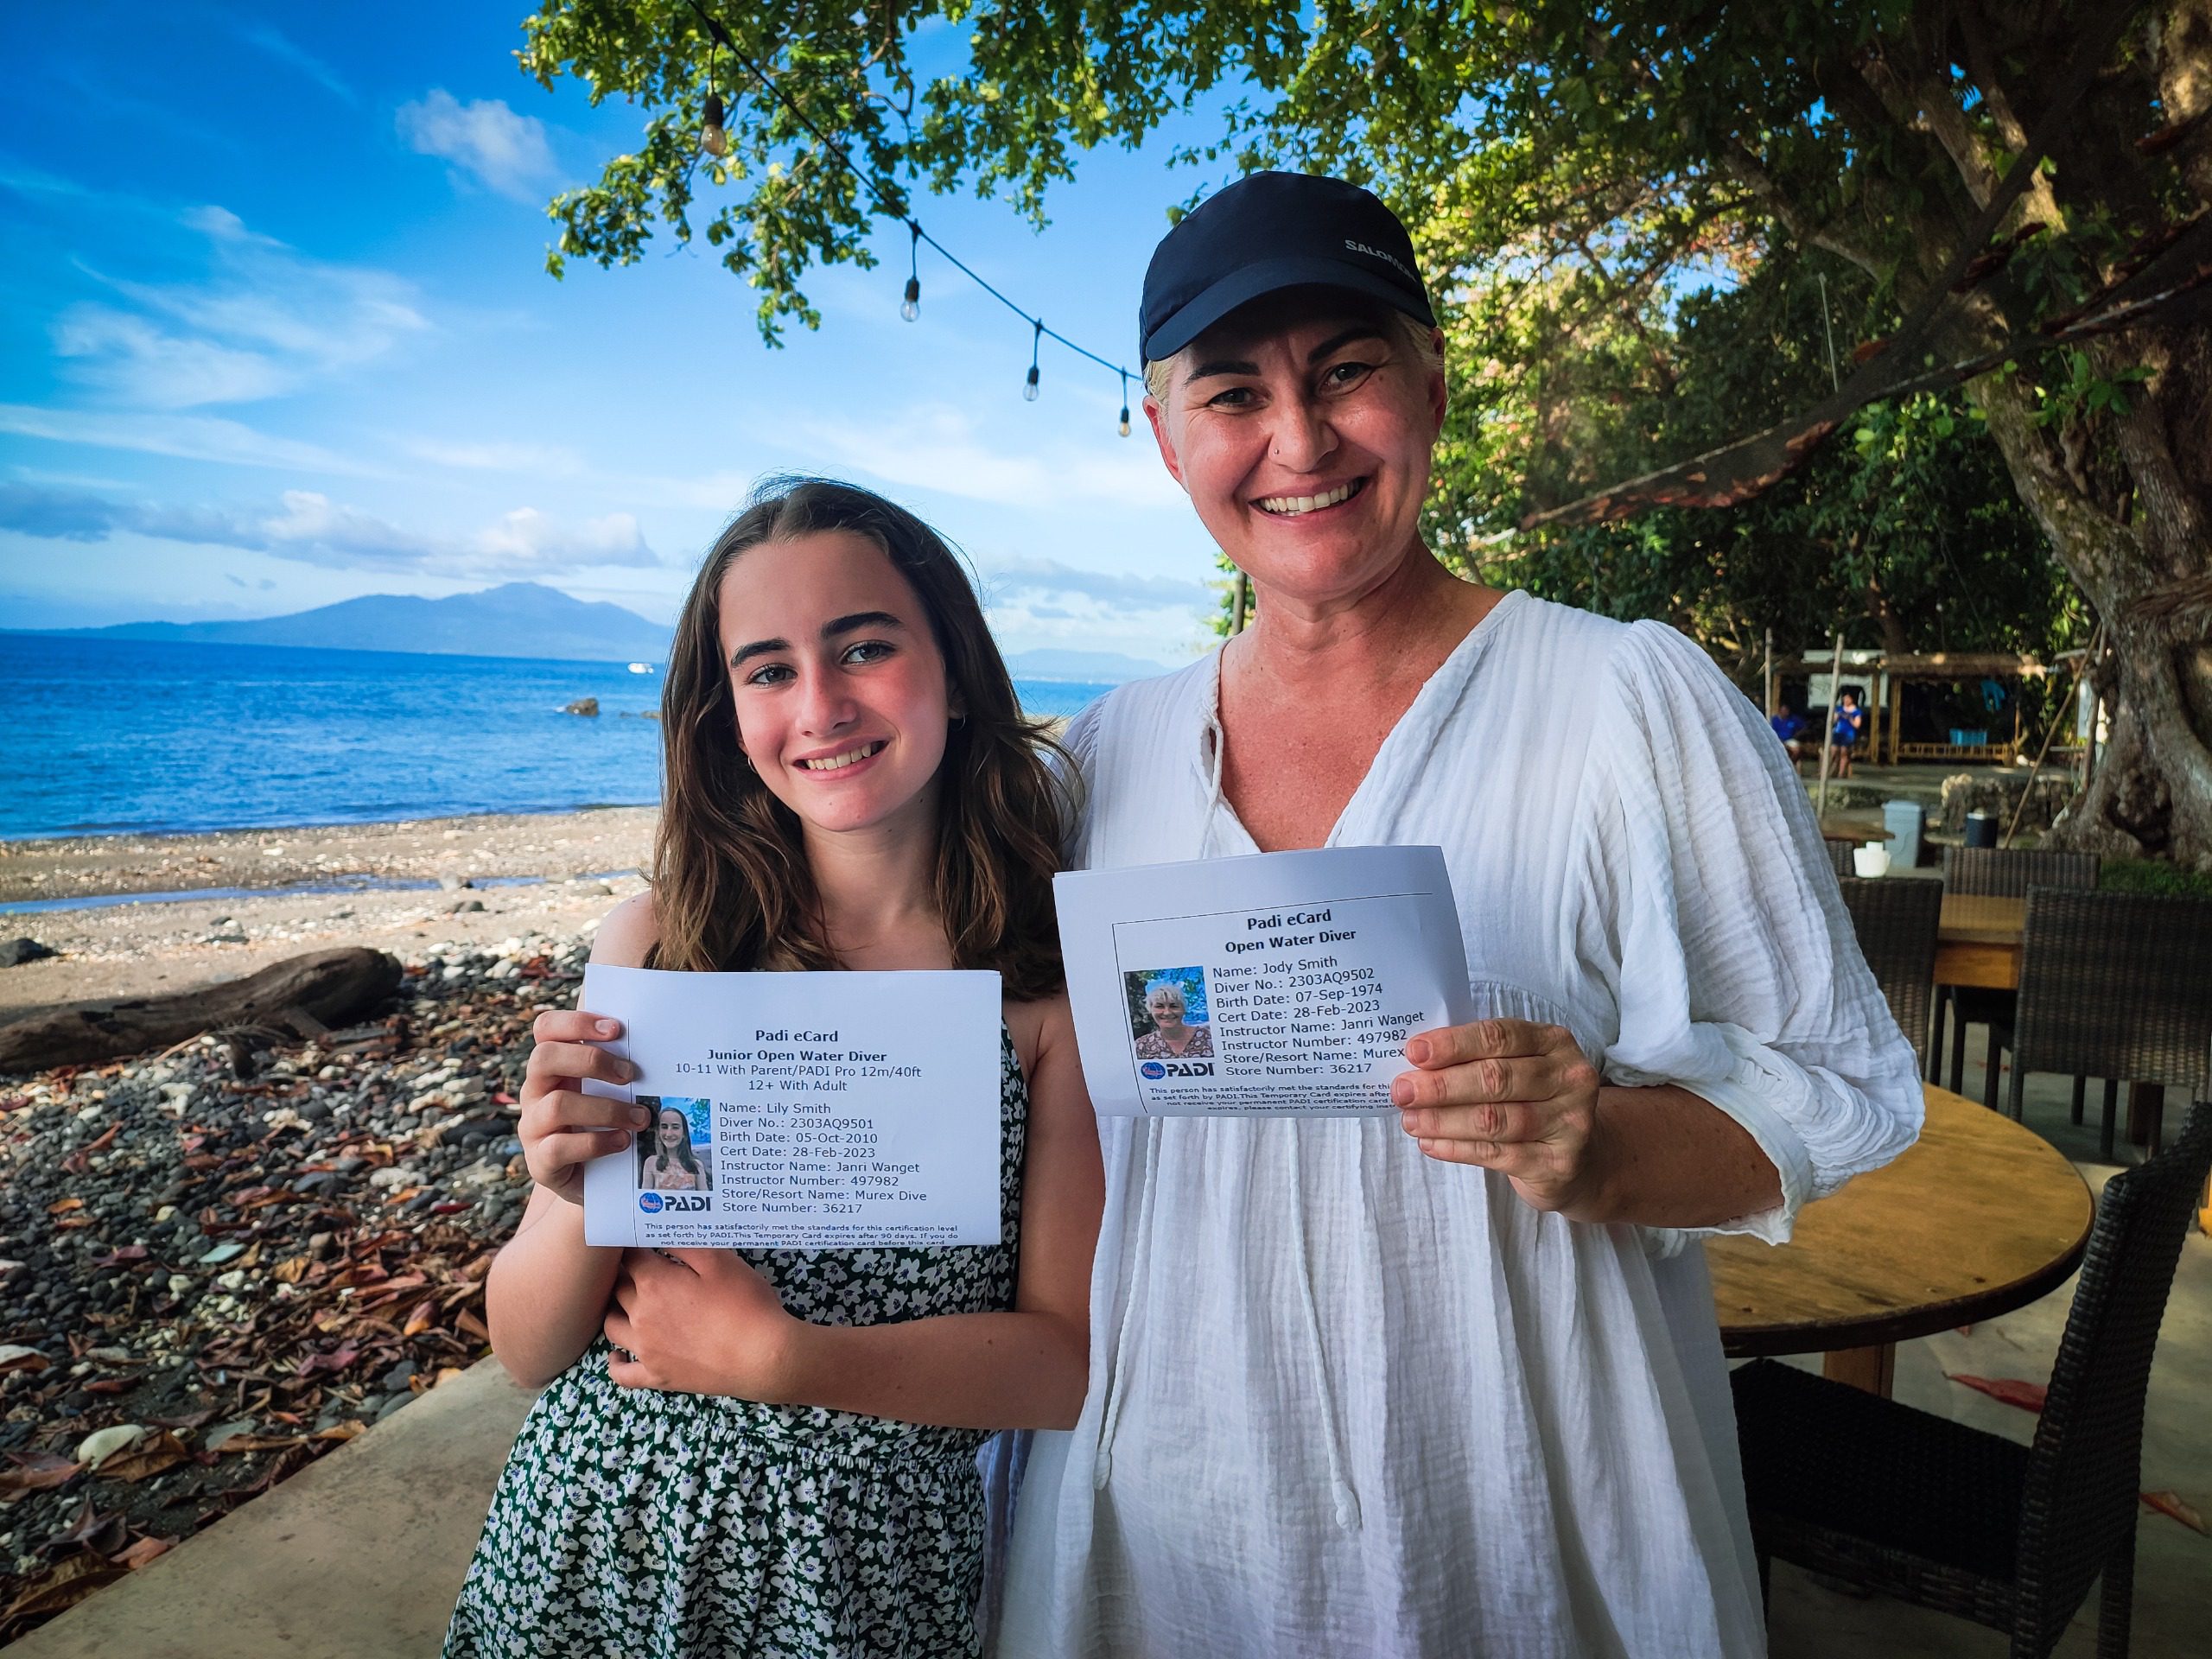 A mother and daughter receive their PADI Open Water Diver certificates together